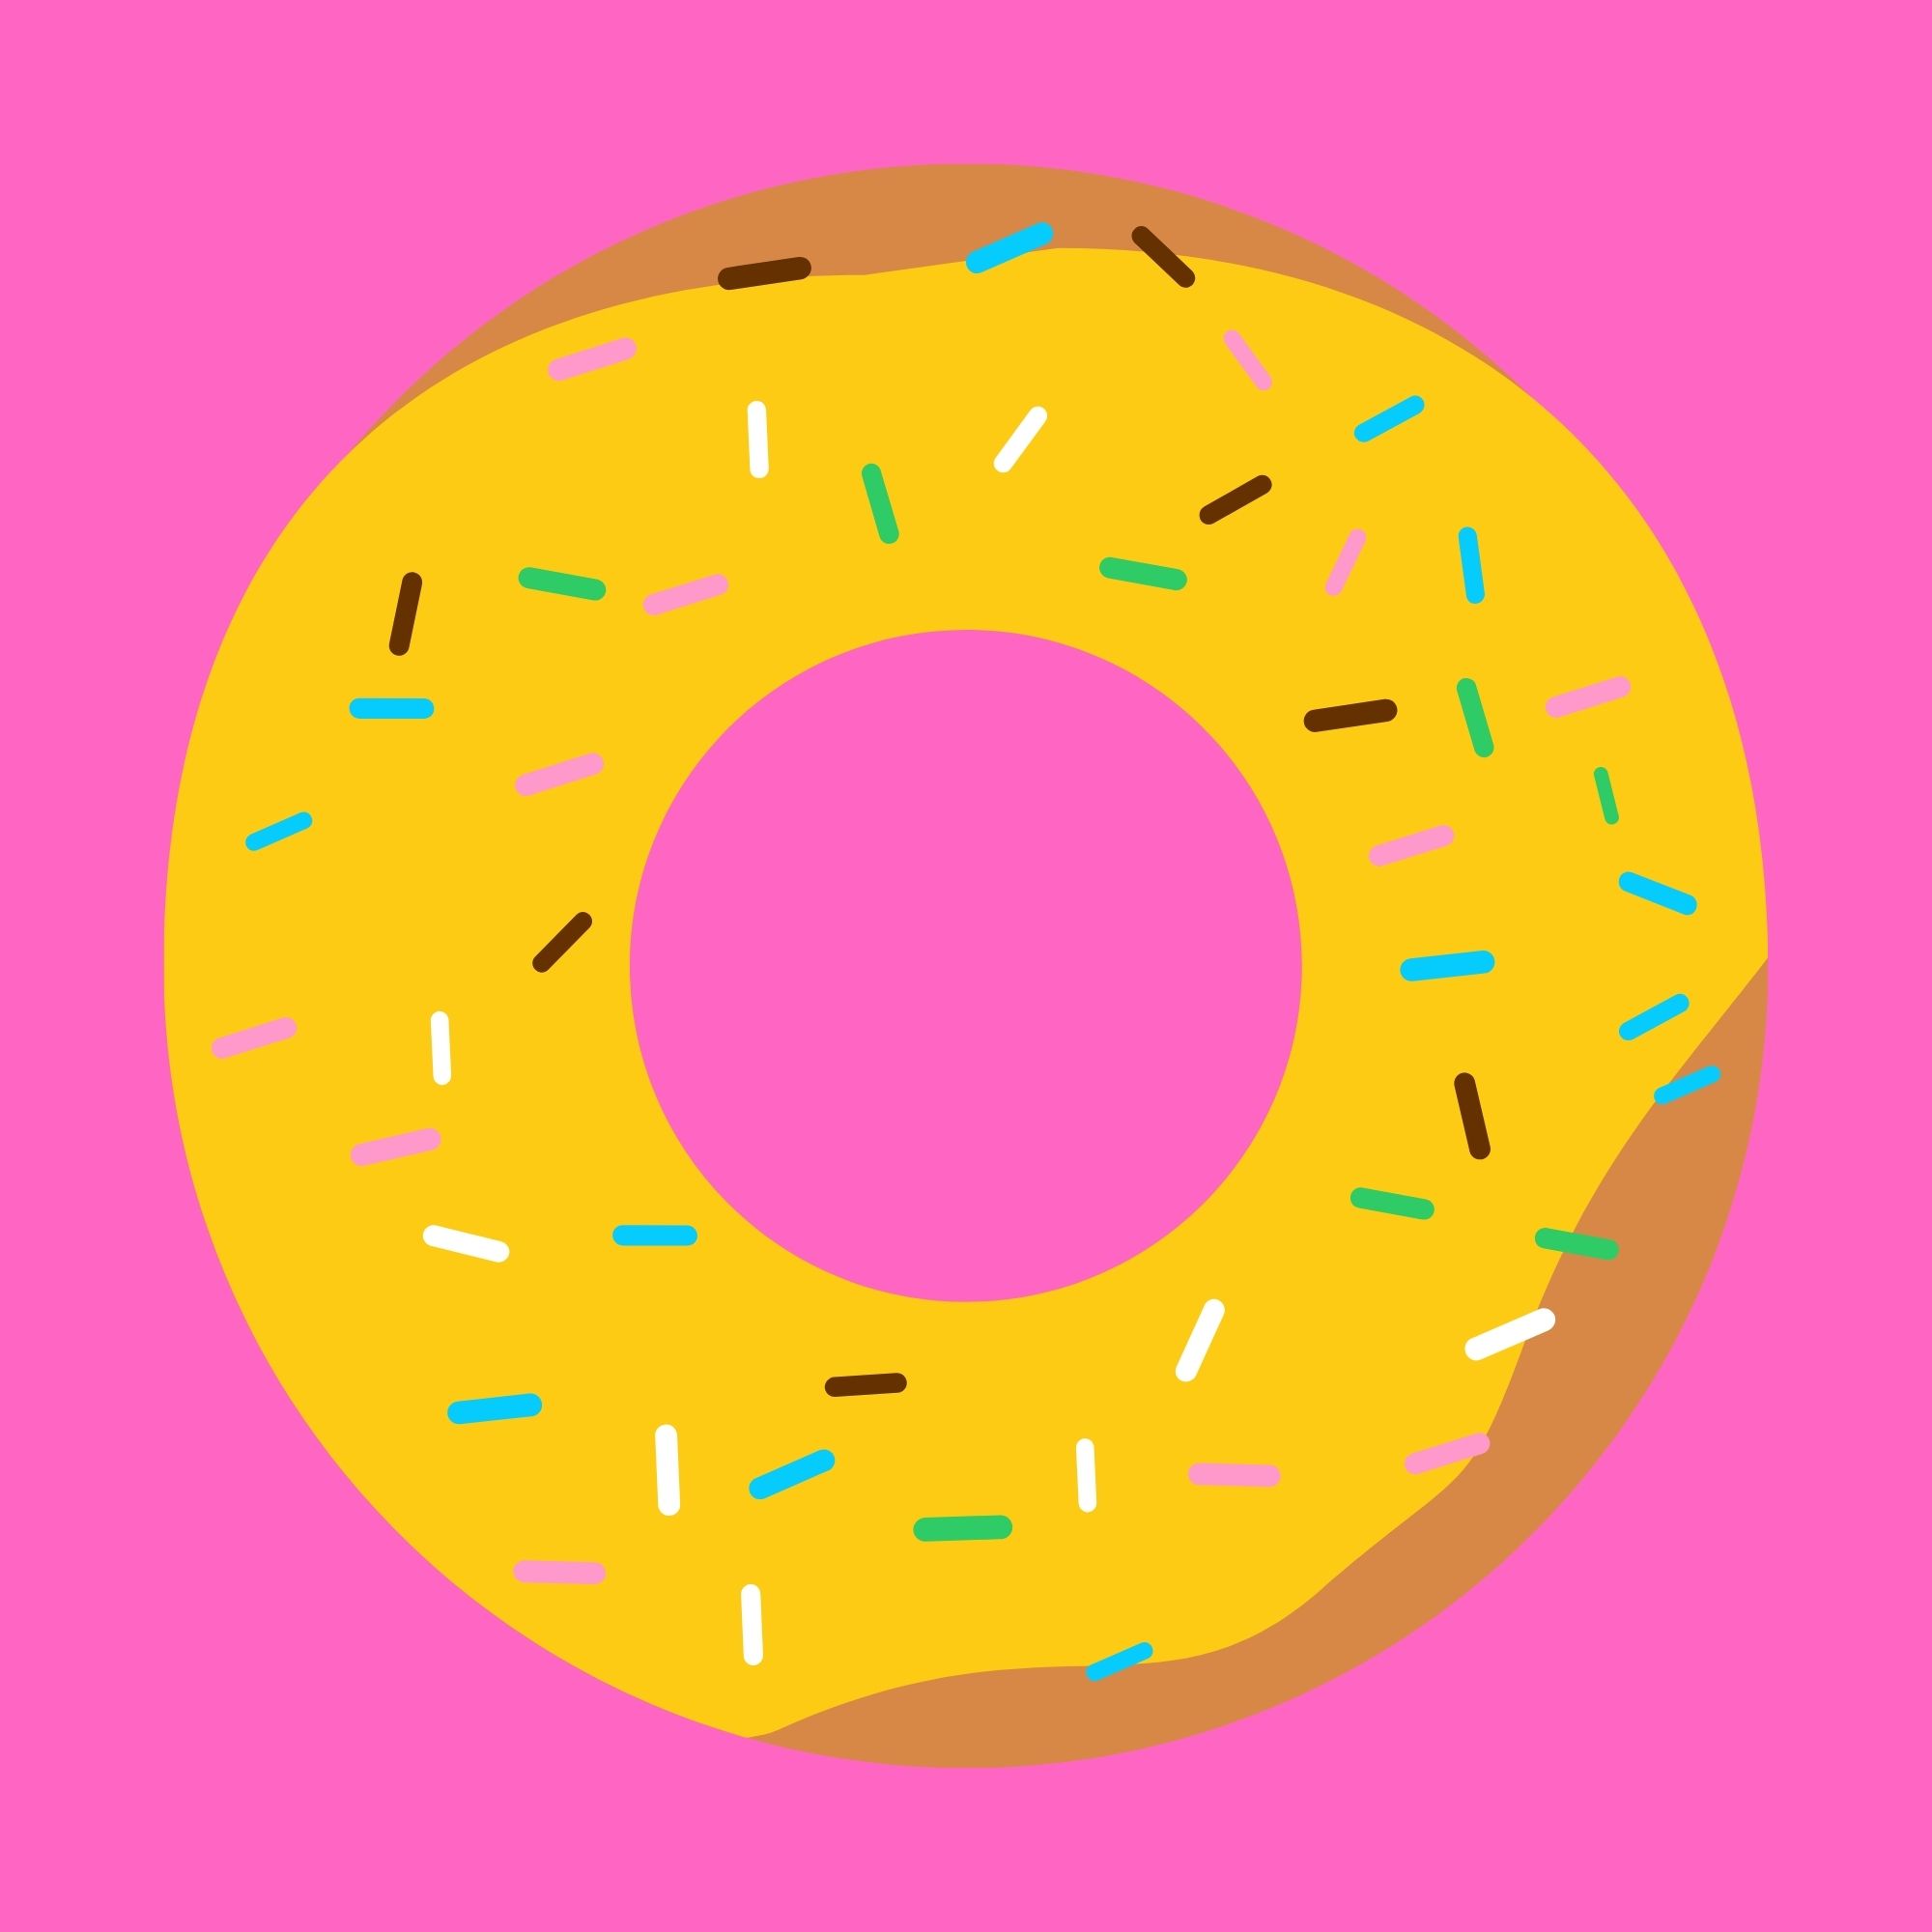 Donut #49 - Poly Donuts | OpenSea